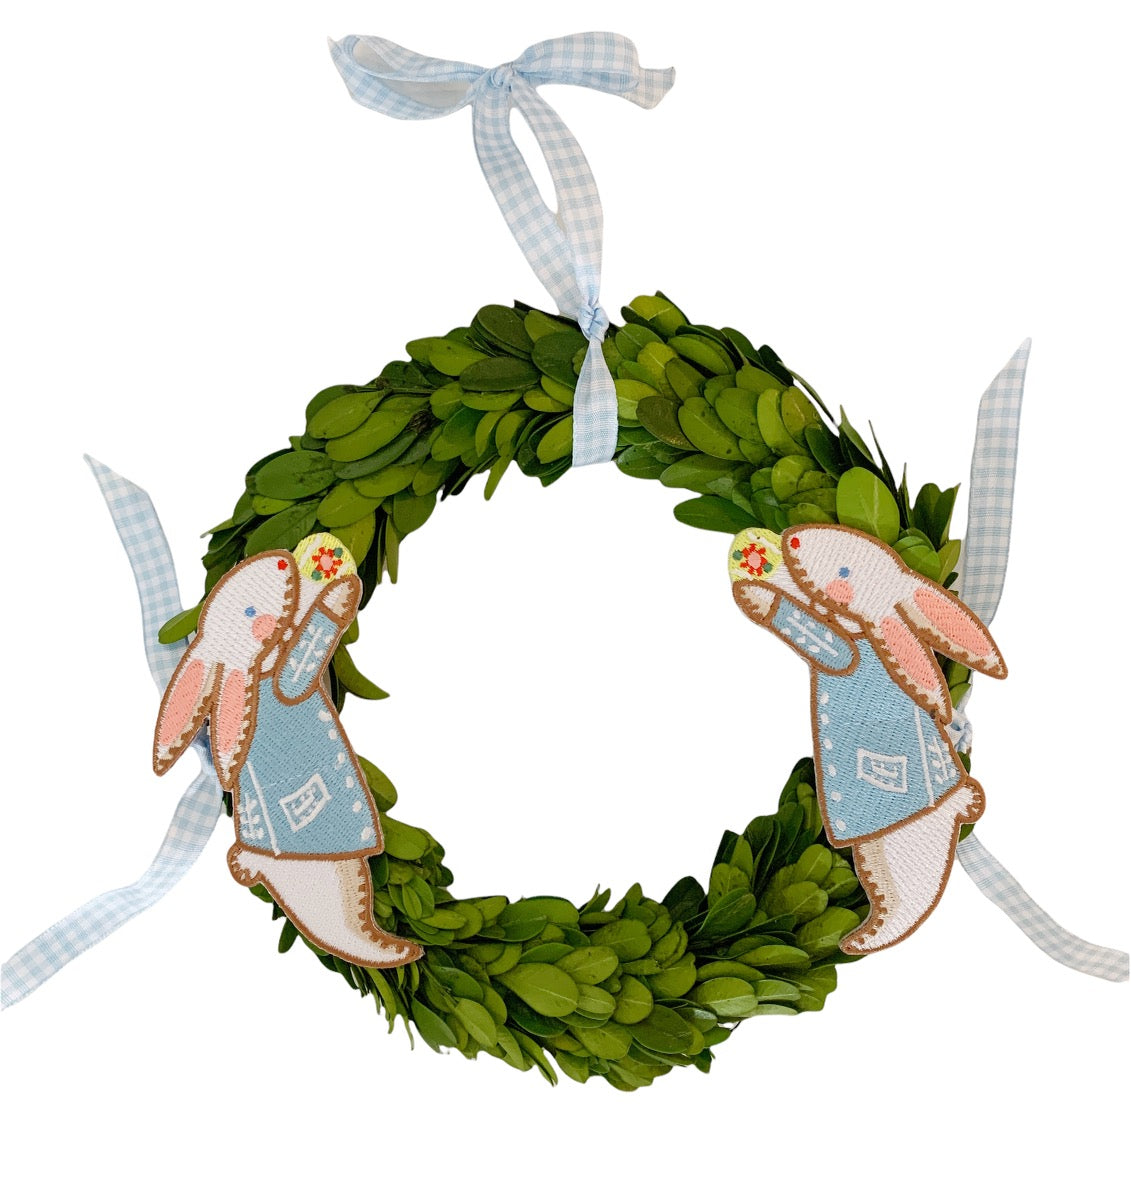 Embroidered Bunny Ornaments on Preserved Laurel Wreath - Premium  from Tricia Lowenfield Design 